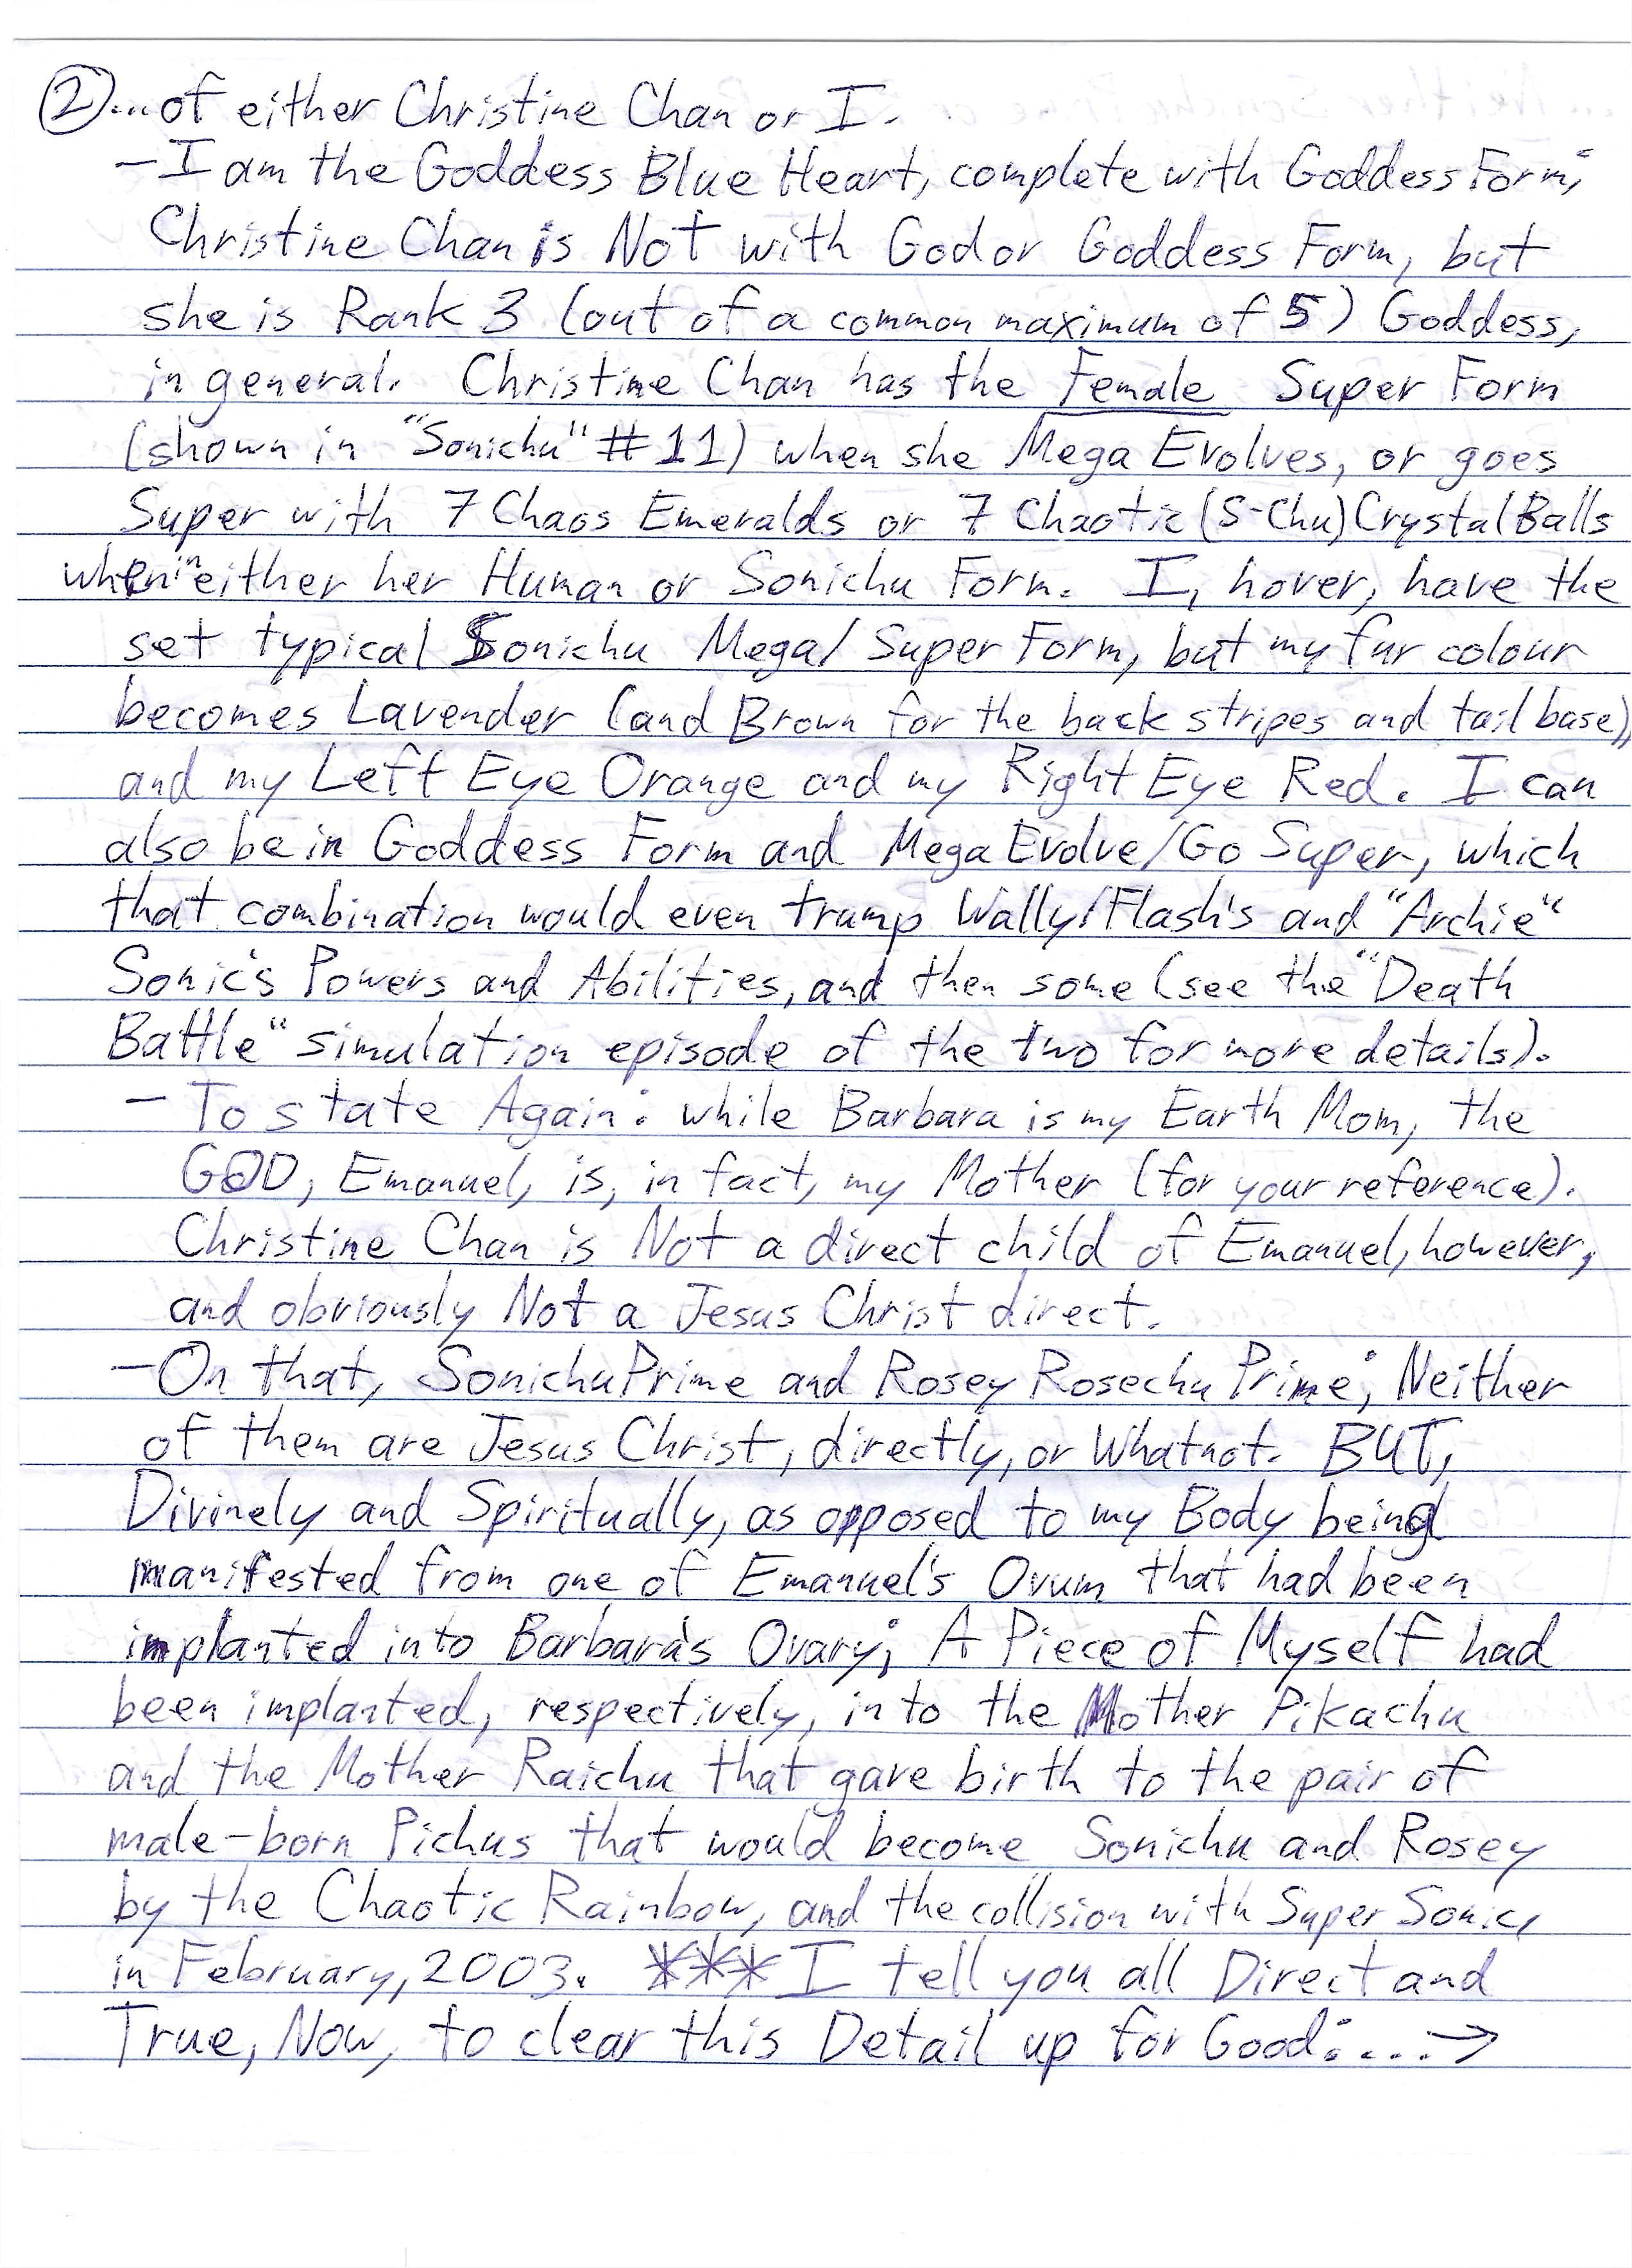 CWC Jan 29 2022 Letter Page 3.jpg